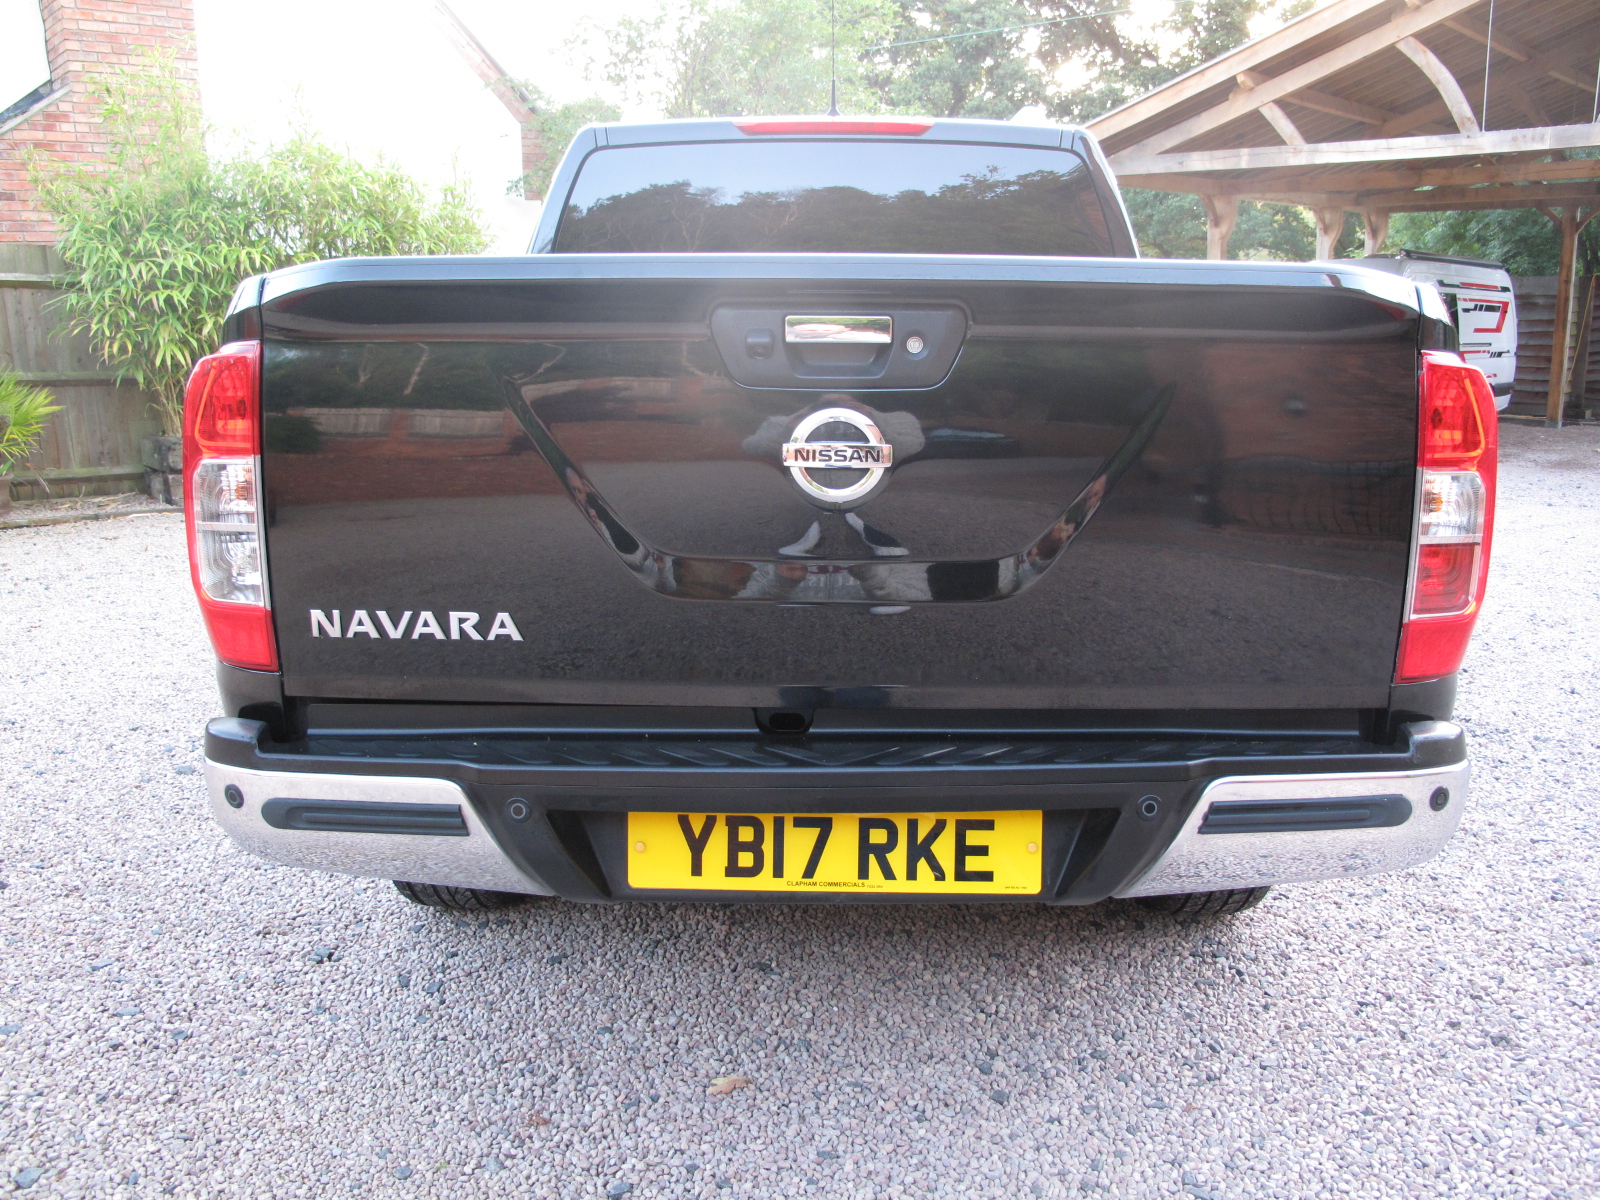 2017 17 Nissan Navara 2.3 dCi Tekna Double Cab Pickup 4WD (s/s) 4dr ABSOLUTELY STUNNING TRUCK! NO VAT! SOLD! full